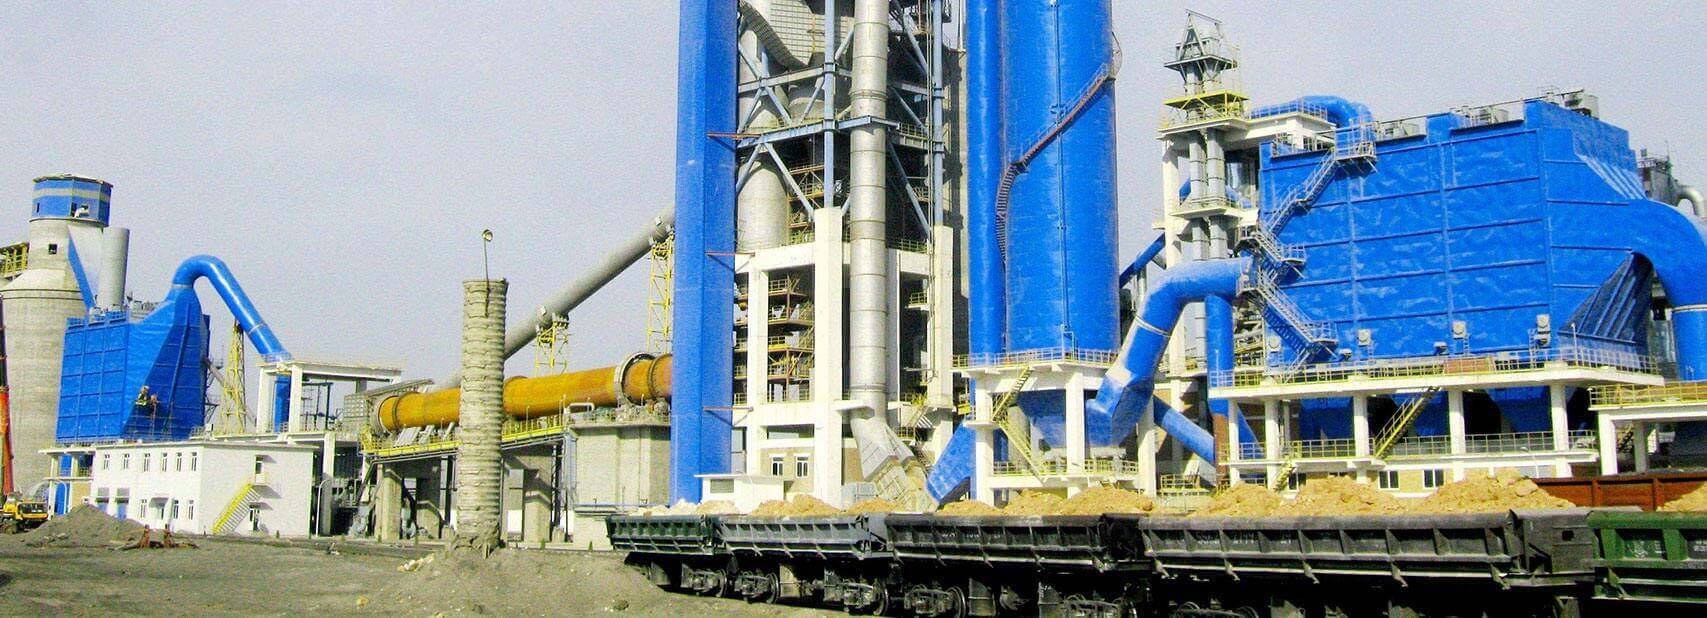 Cement Production Line In South Africa